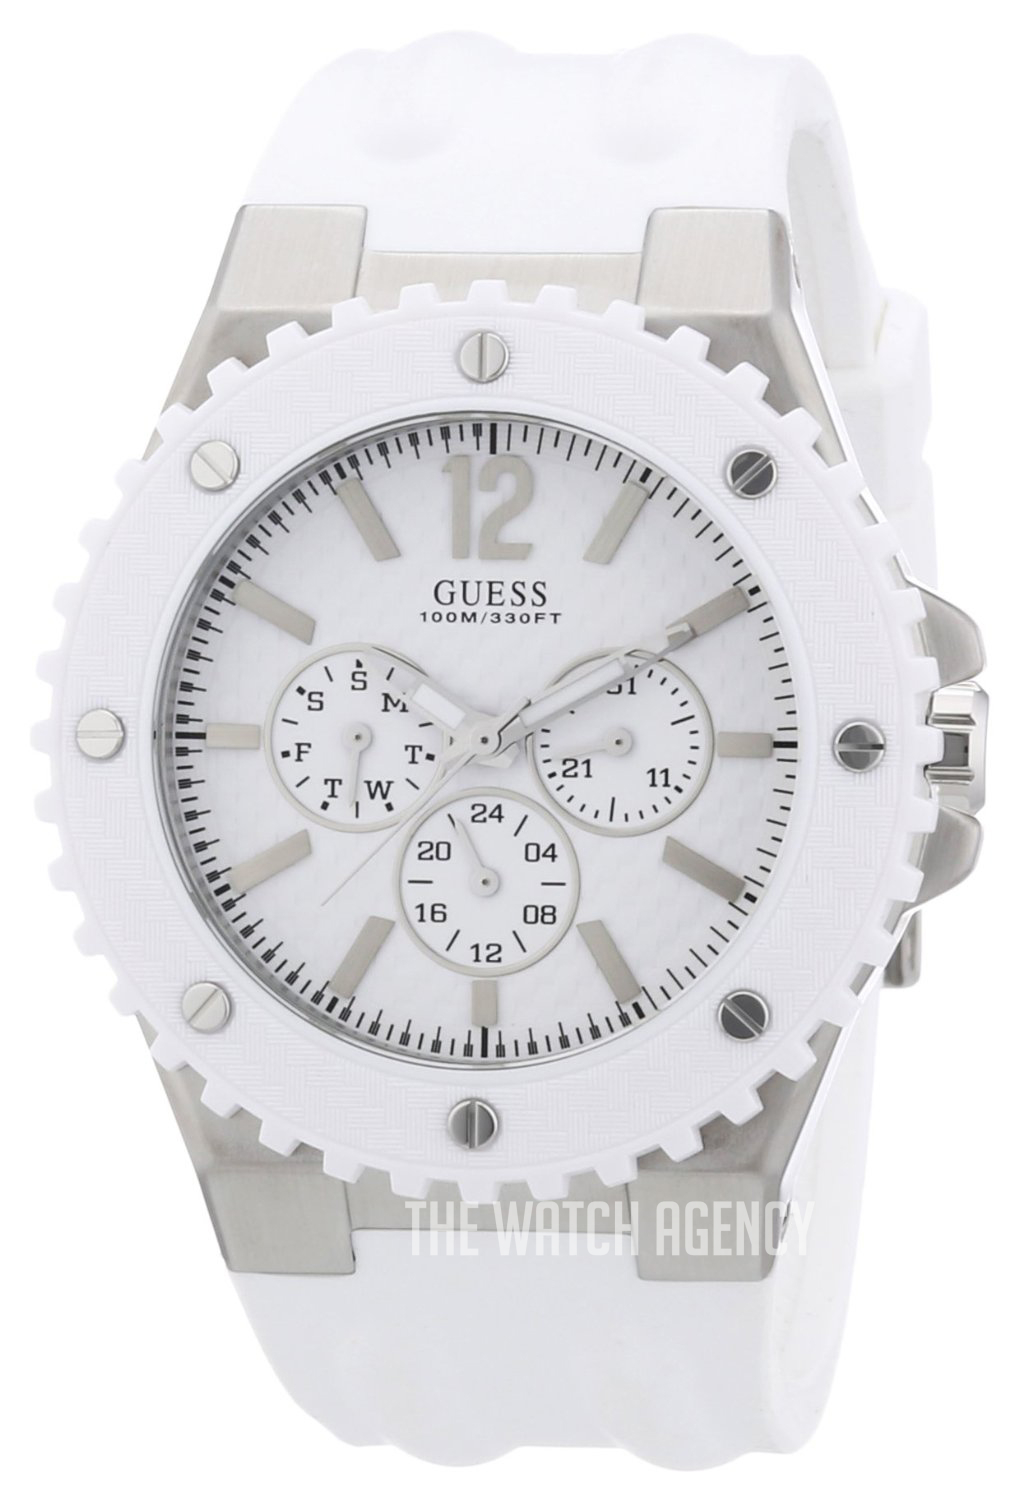 TheWatchAgency™ Guess | OverDrive W10603G1